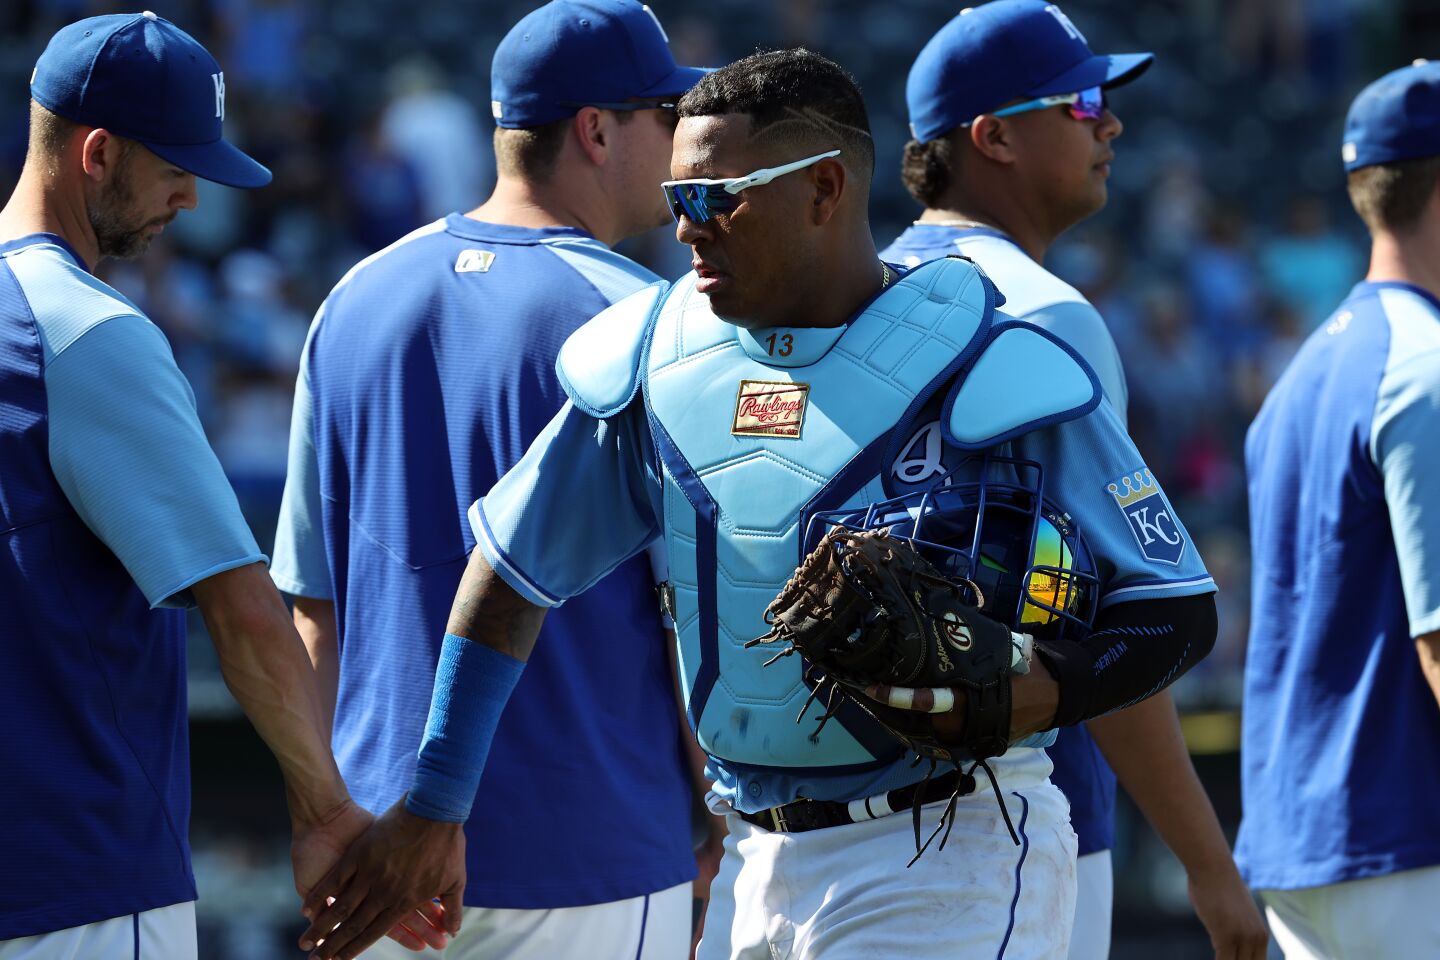 22 | Kansas City Royals (65-78; LW: 23)At least Salvador Perez continues to make things interesting: His 42 homers have him withing striking distance of Shohei Ohtani and Vladimir Guerrero Jr. for the MLB lead (44) and the Royals’ single-season record (Jorge Soler’s 48 in 2019).